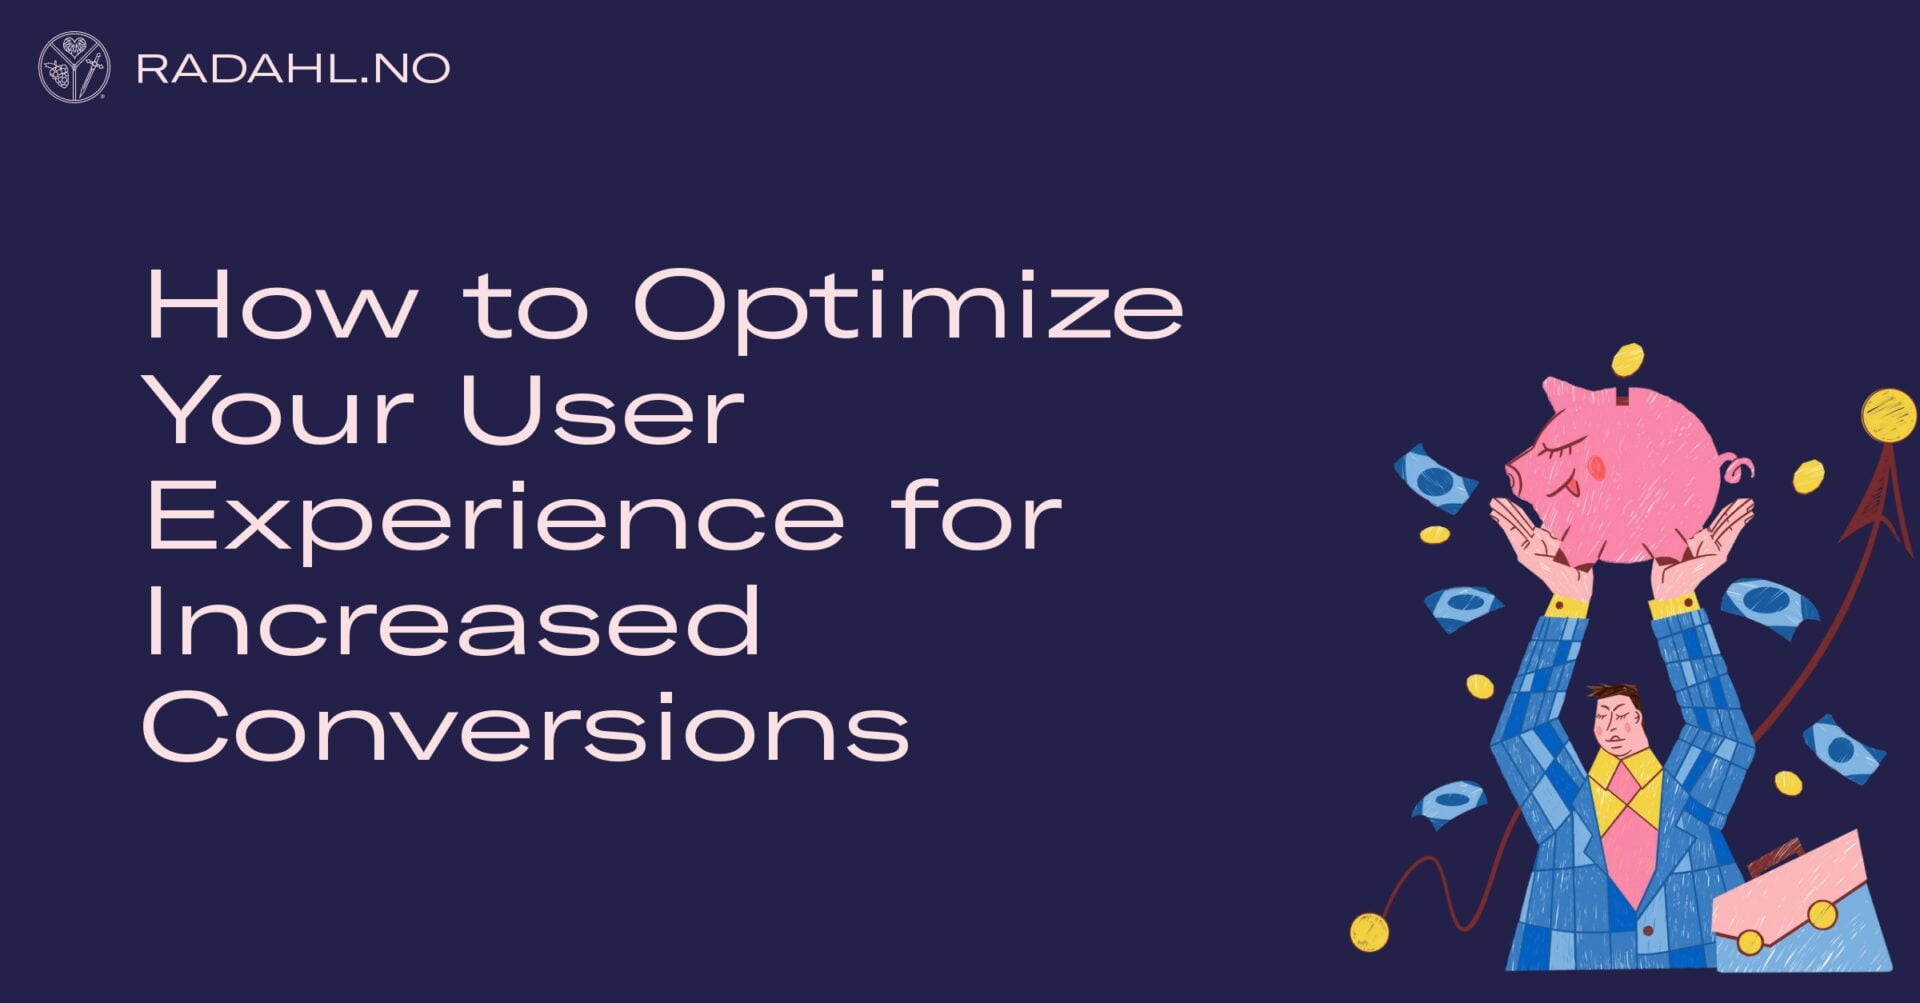 How to optimize your user experience for increased conversions